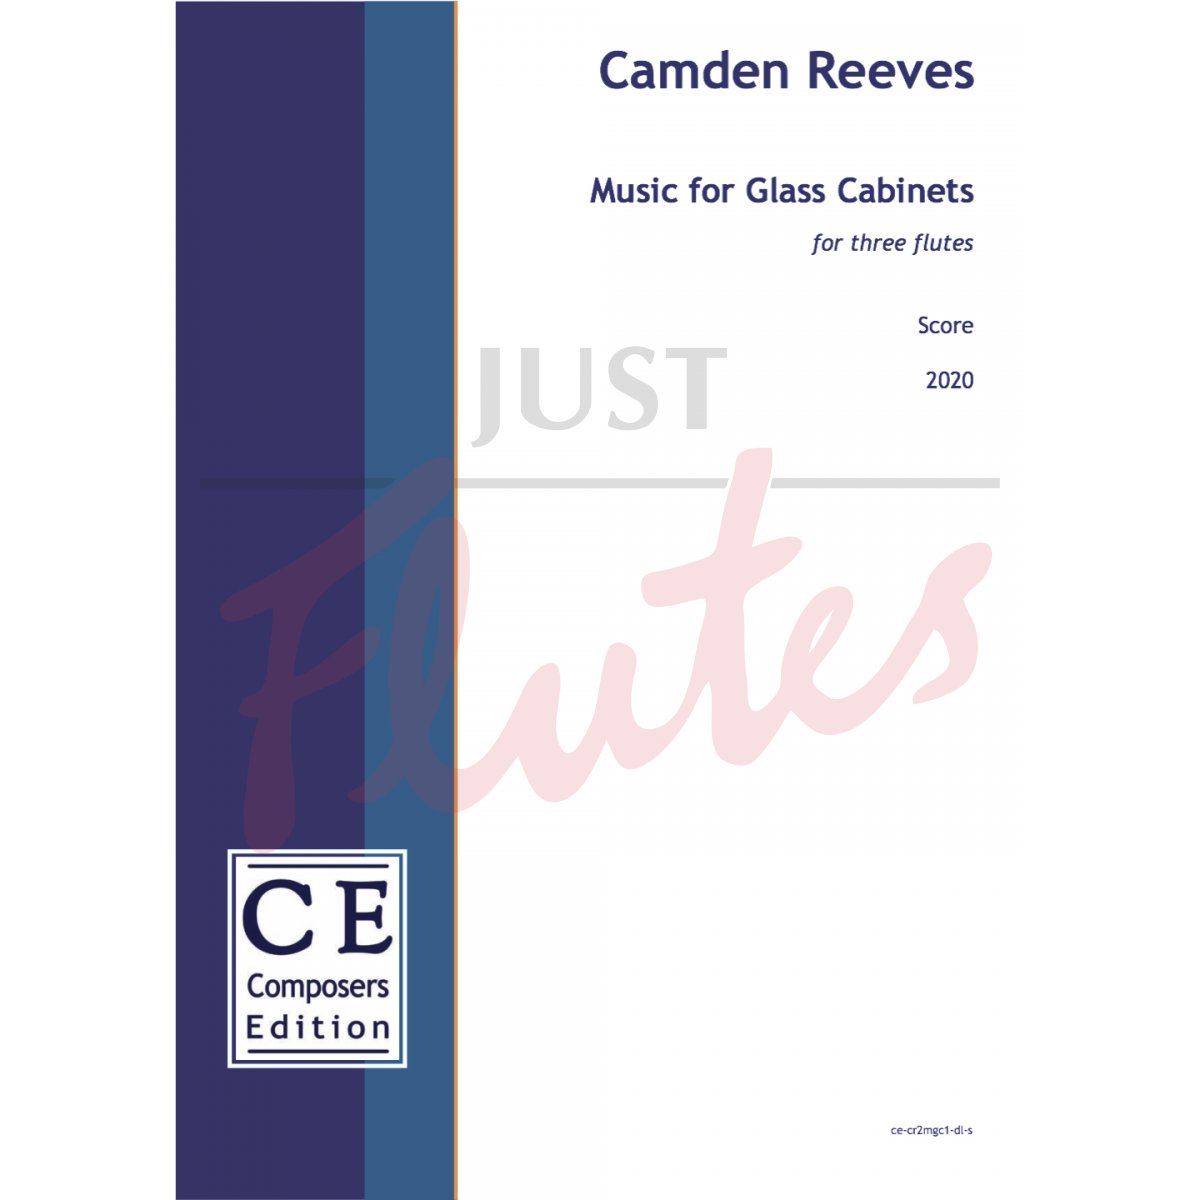 Music for Glass Cabinets for Three Flutes